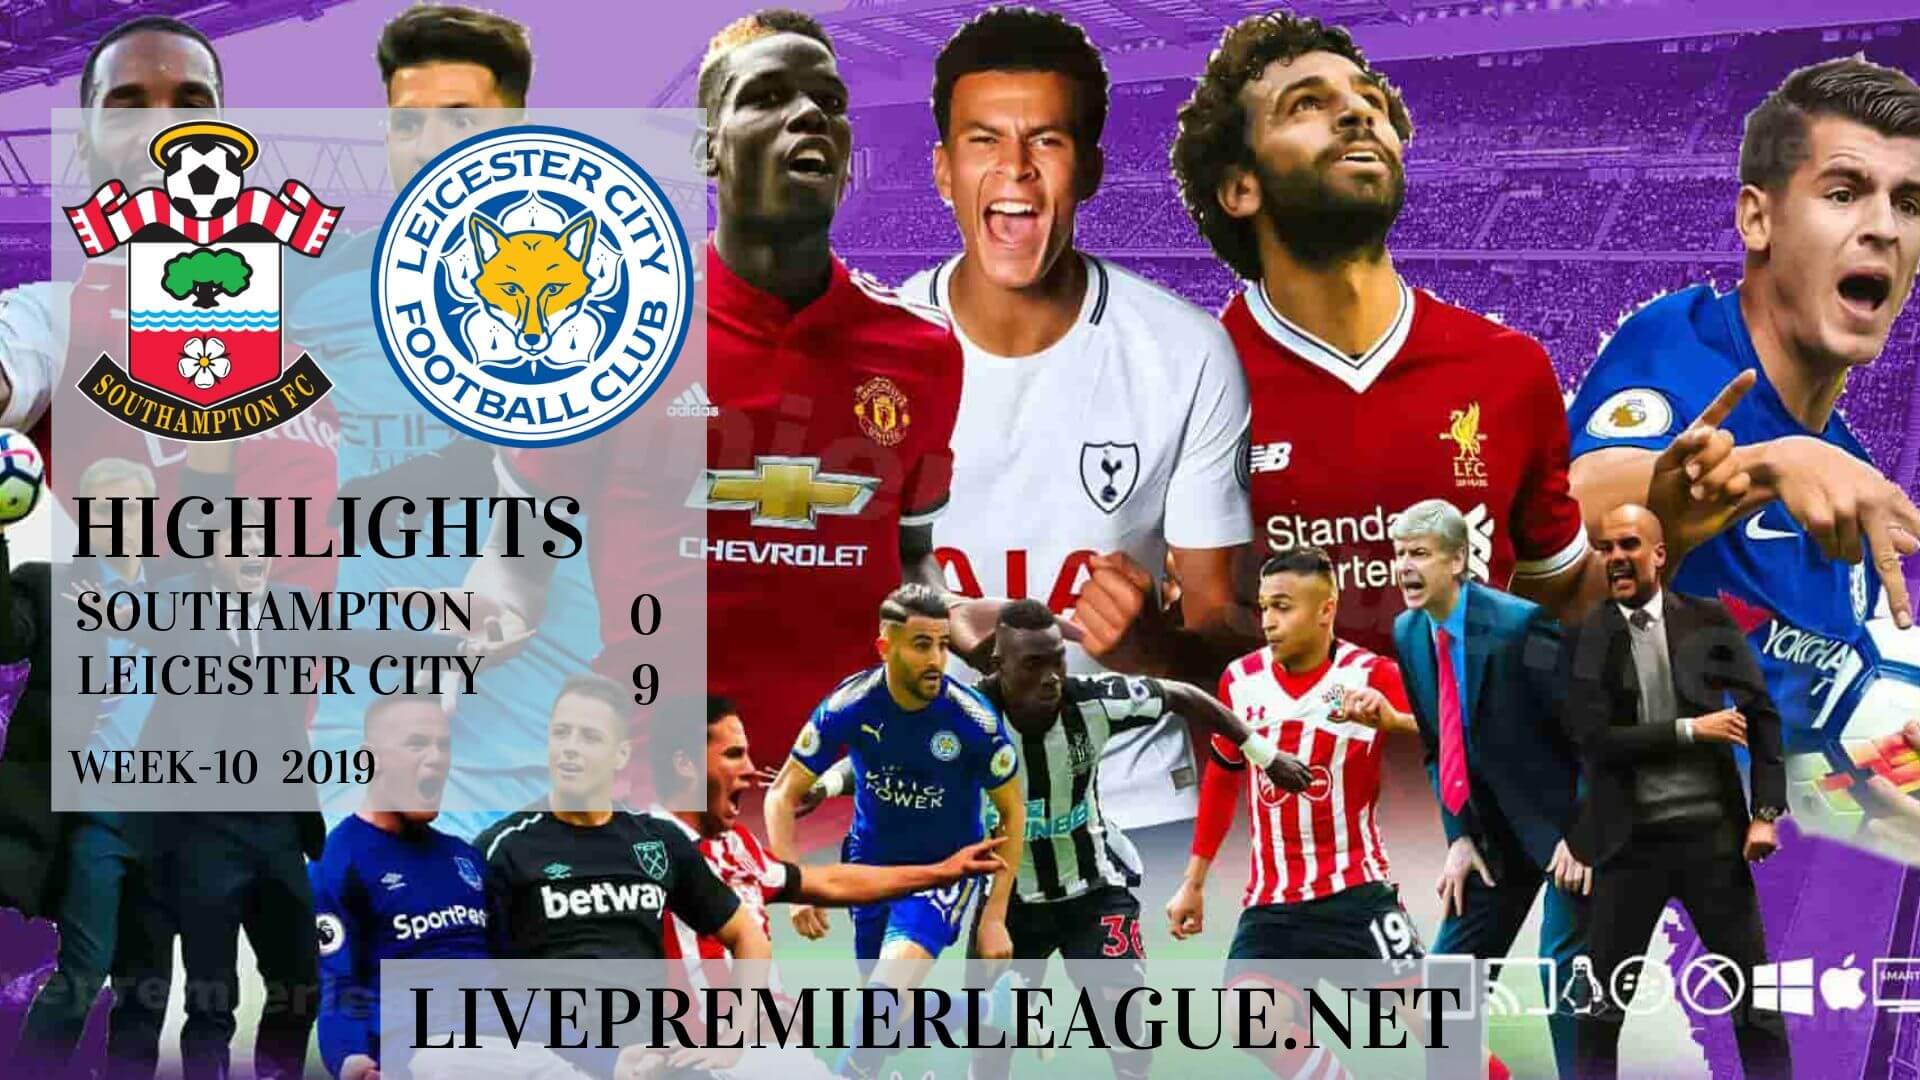 Southampton vs Leicester City Highlights 2019 Week 10